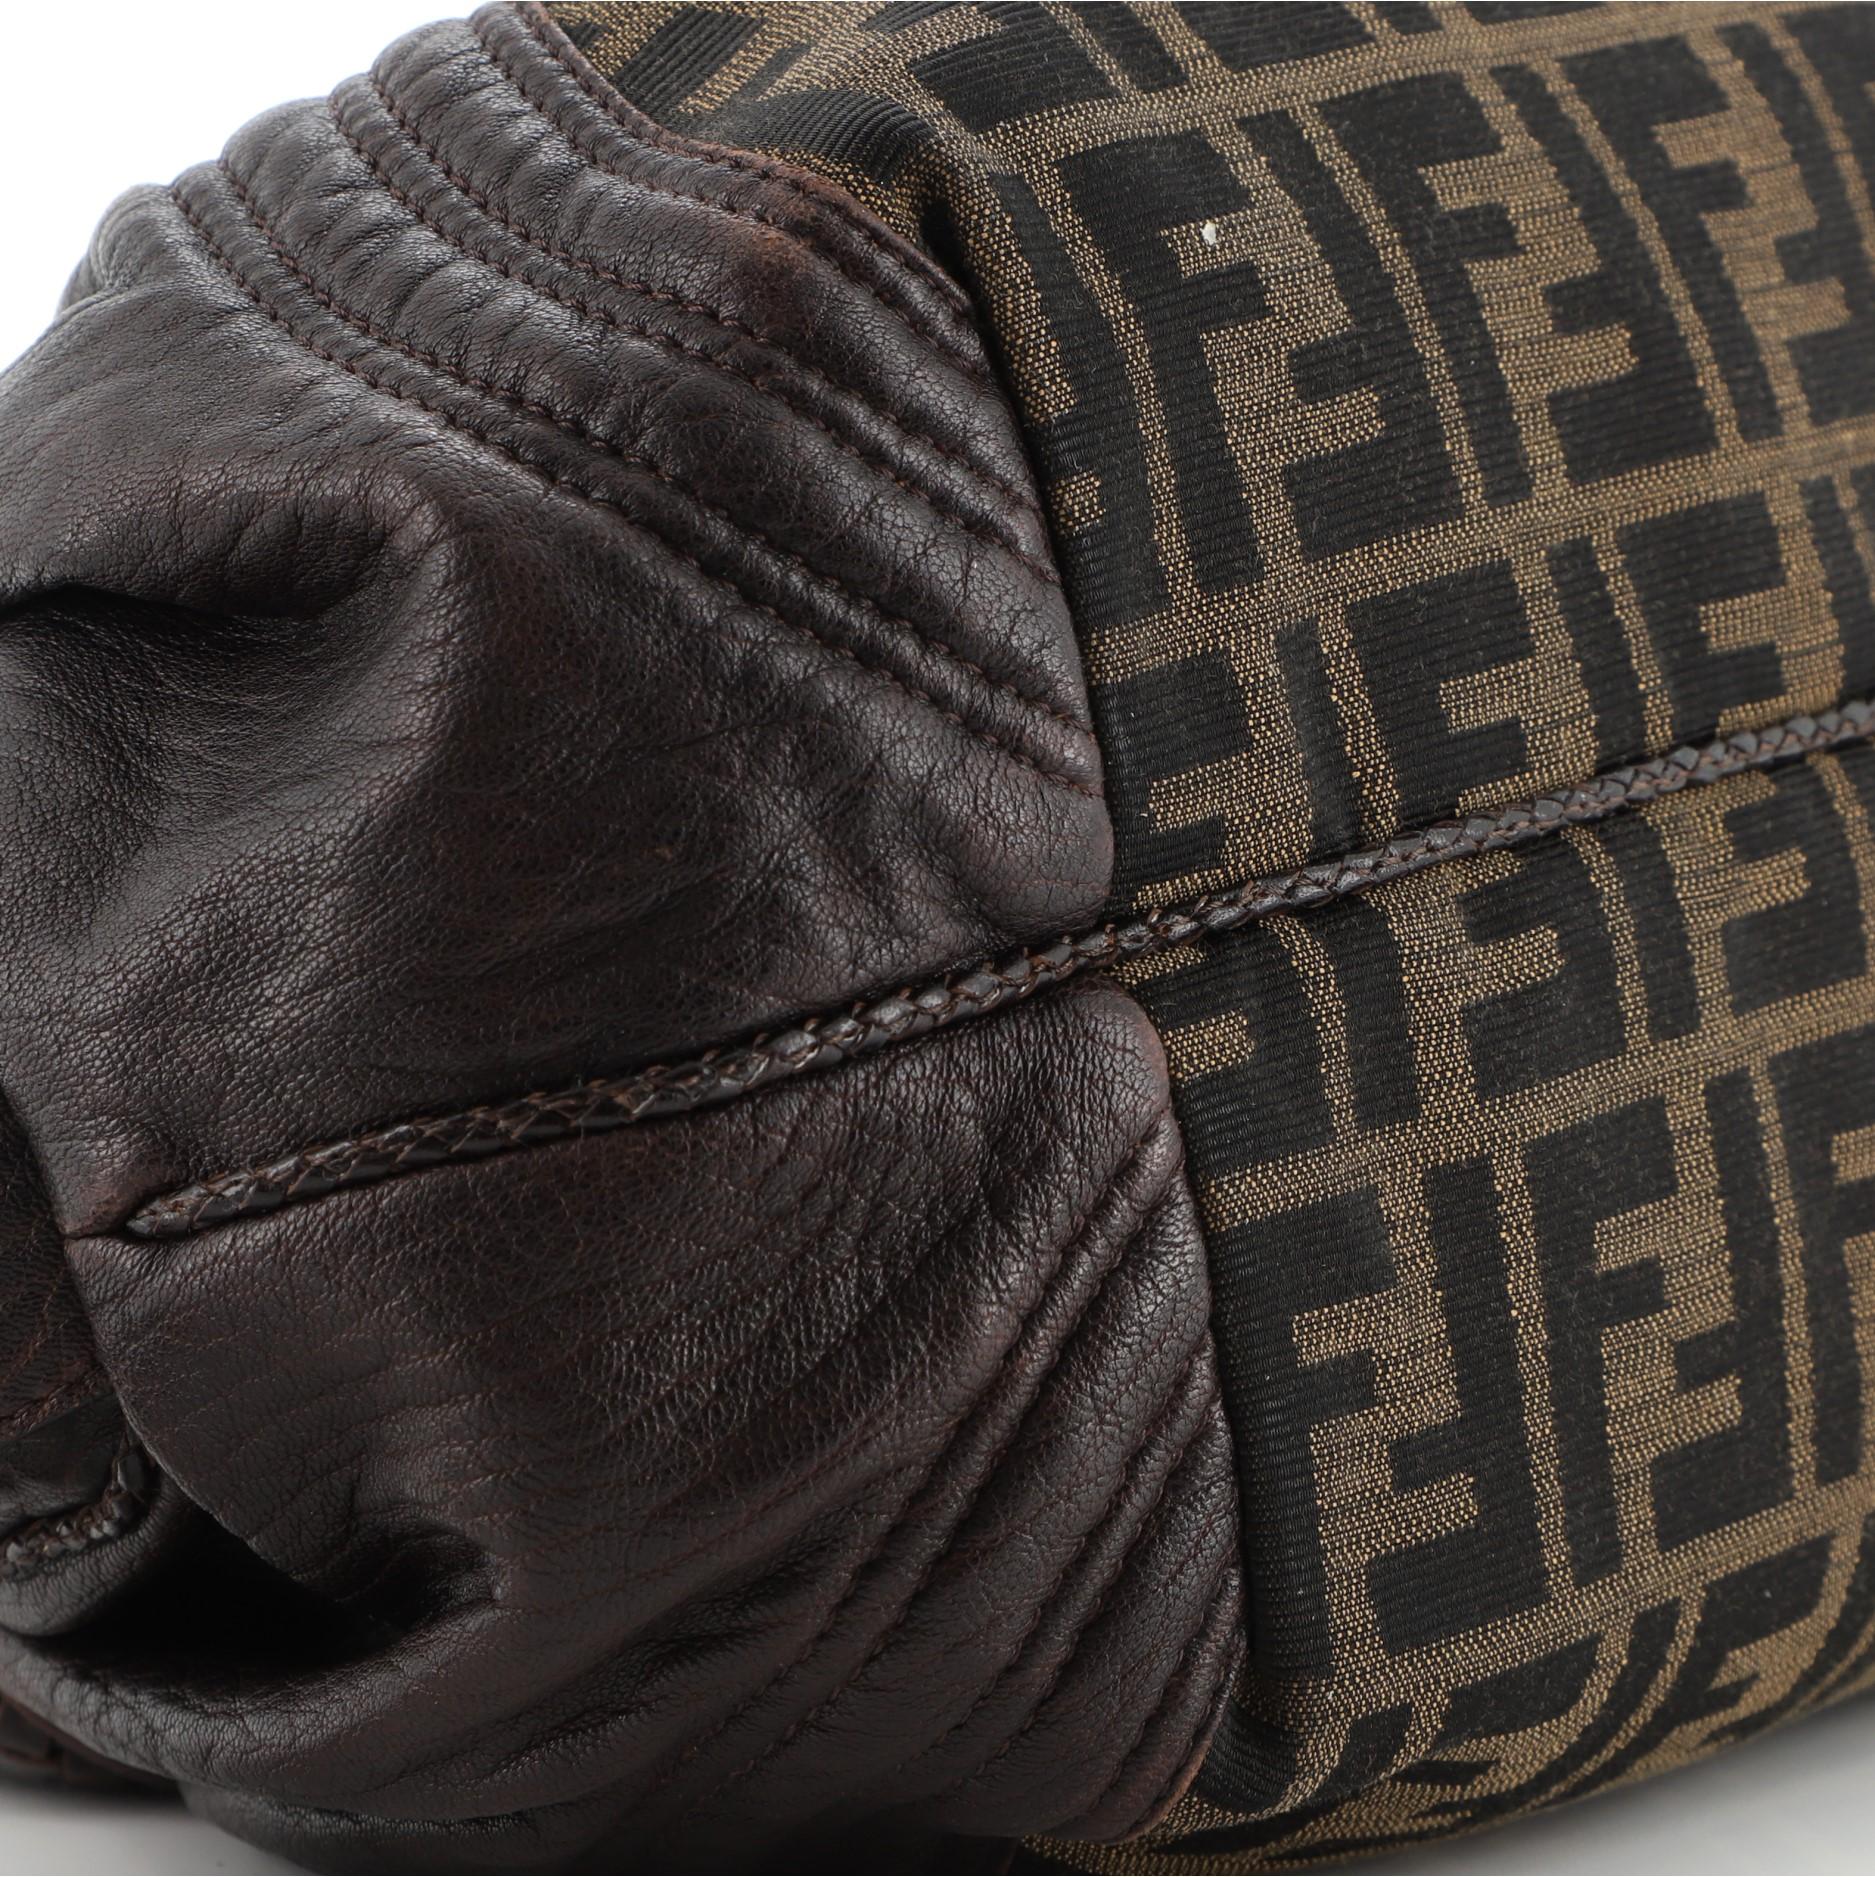 Black Fendi Spy Bag Zucca Canvas and Leather Baby